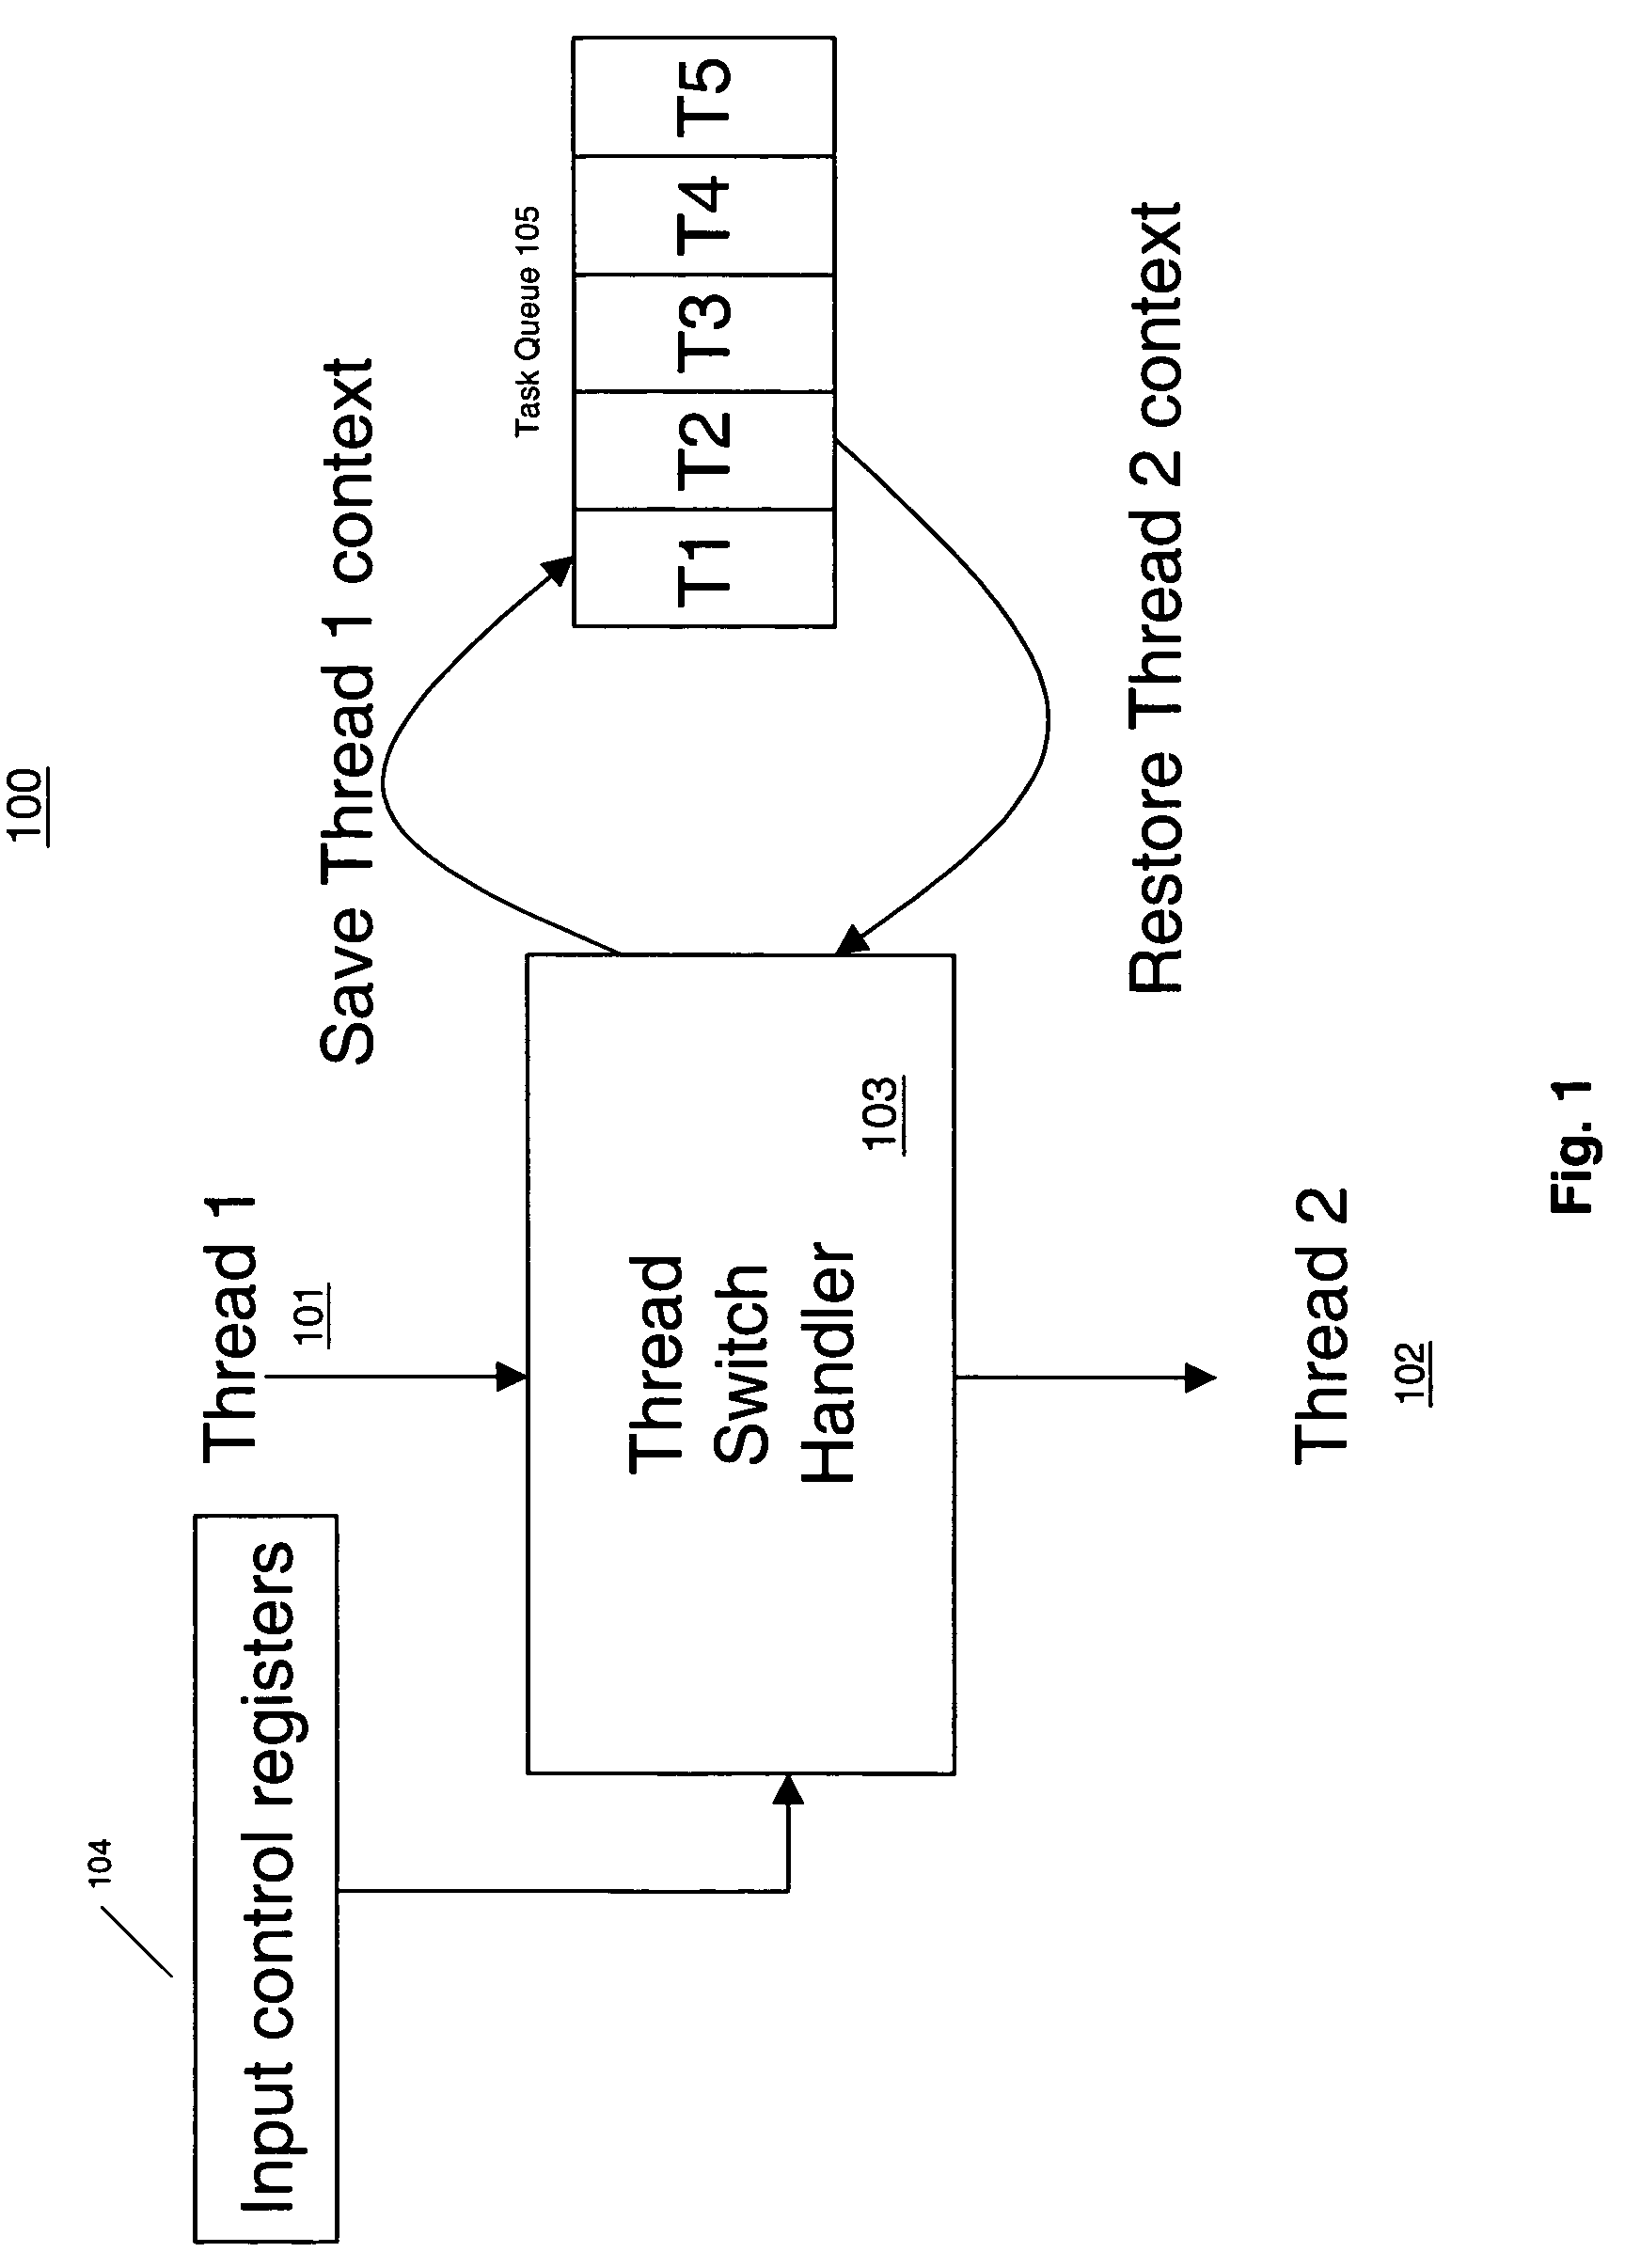 Methods and apparatuses for thread management of multi-threading